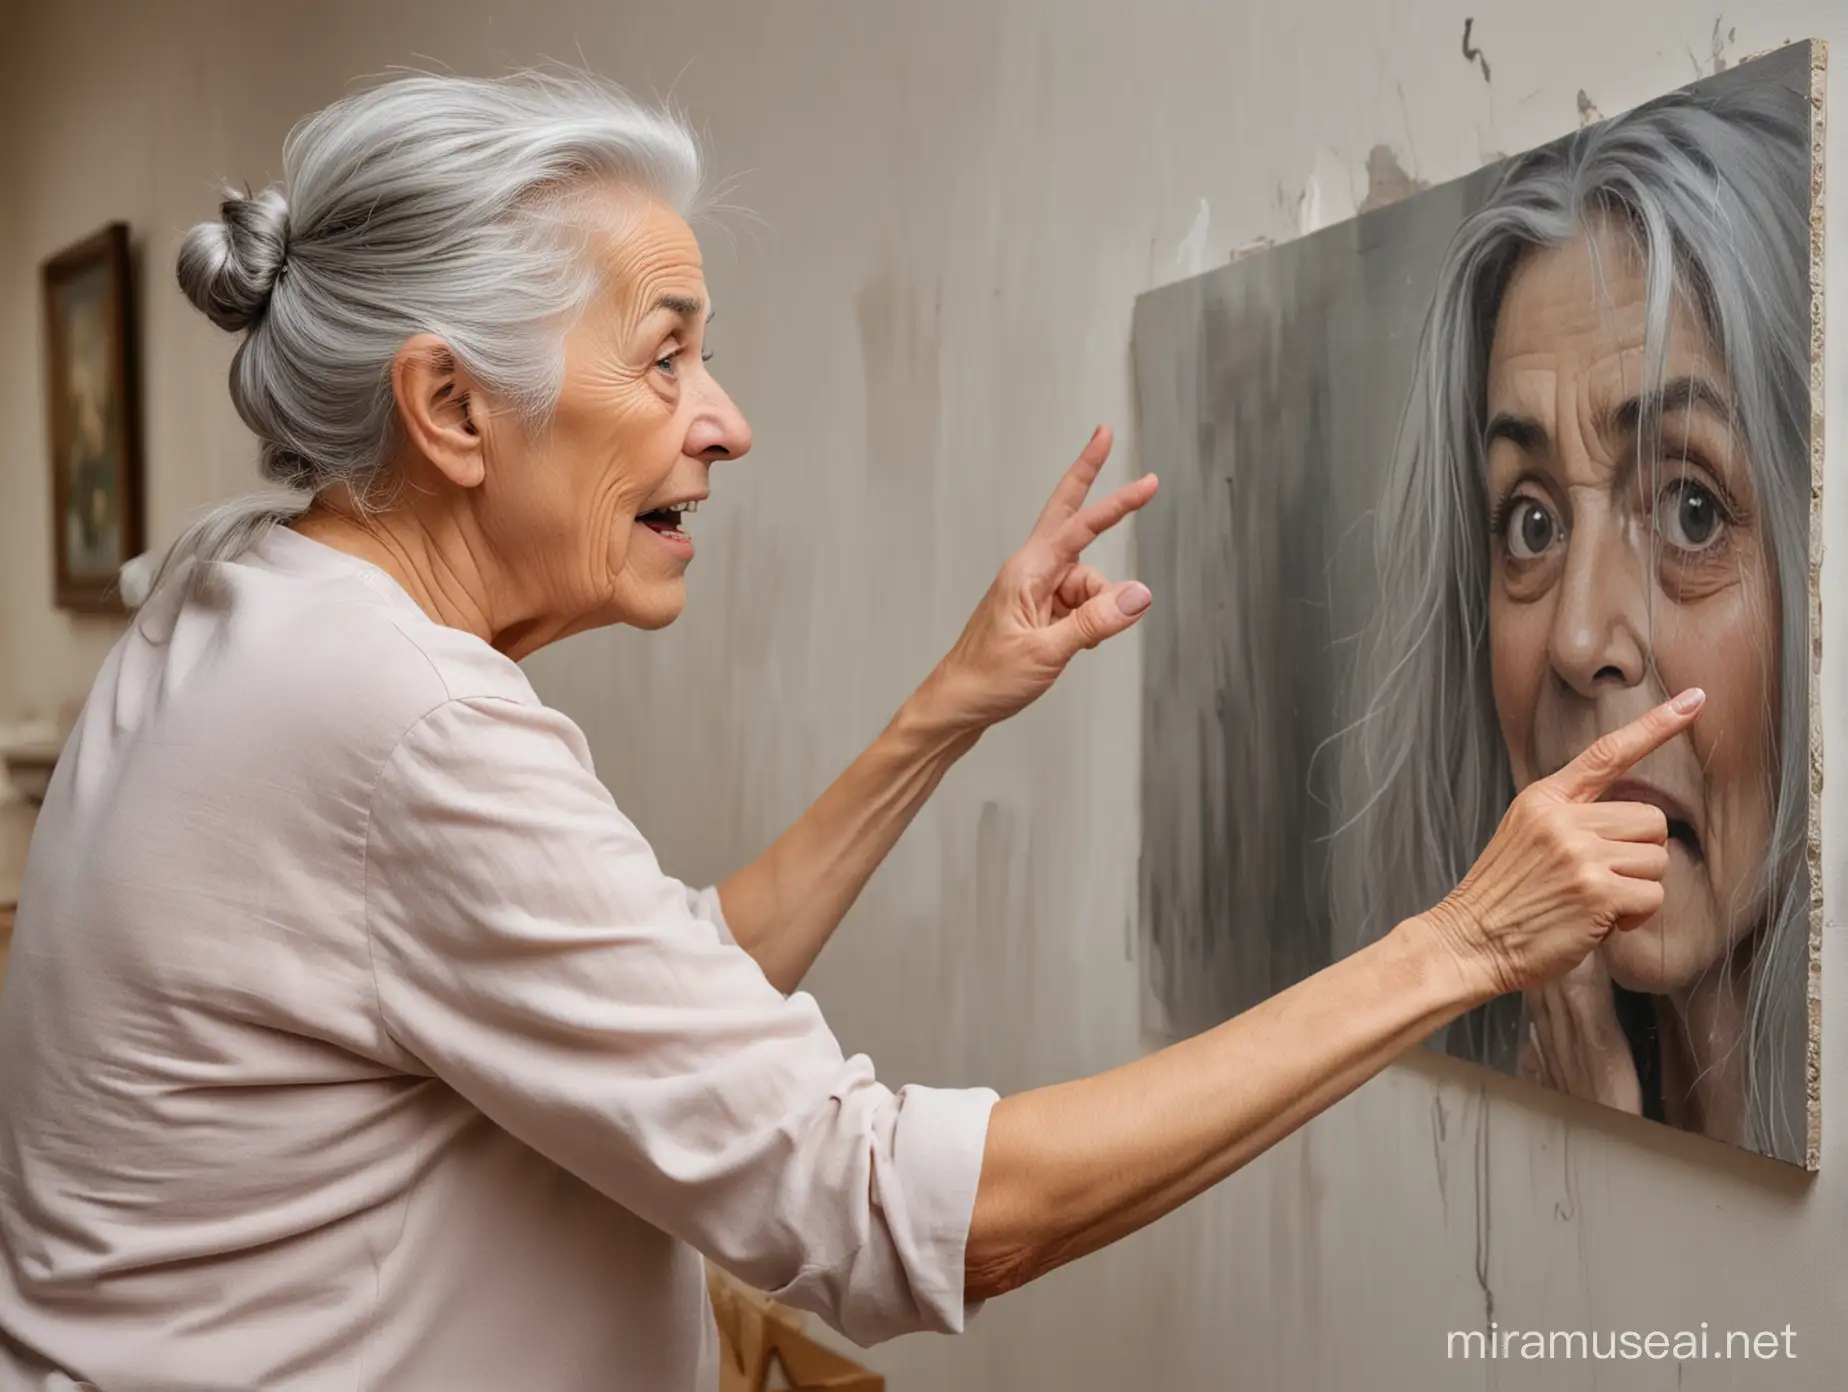 An old woman points her finger at a painting on the wall, she has grey hair, next to her is a young, 7-year-old girl looking at the painting in horror and holding her hands in her hair.